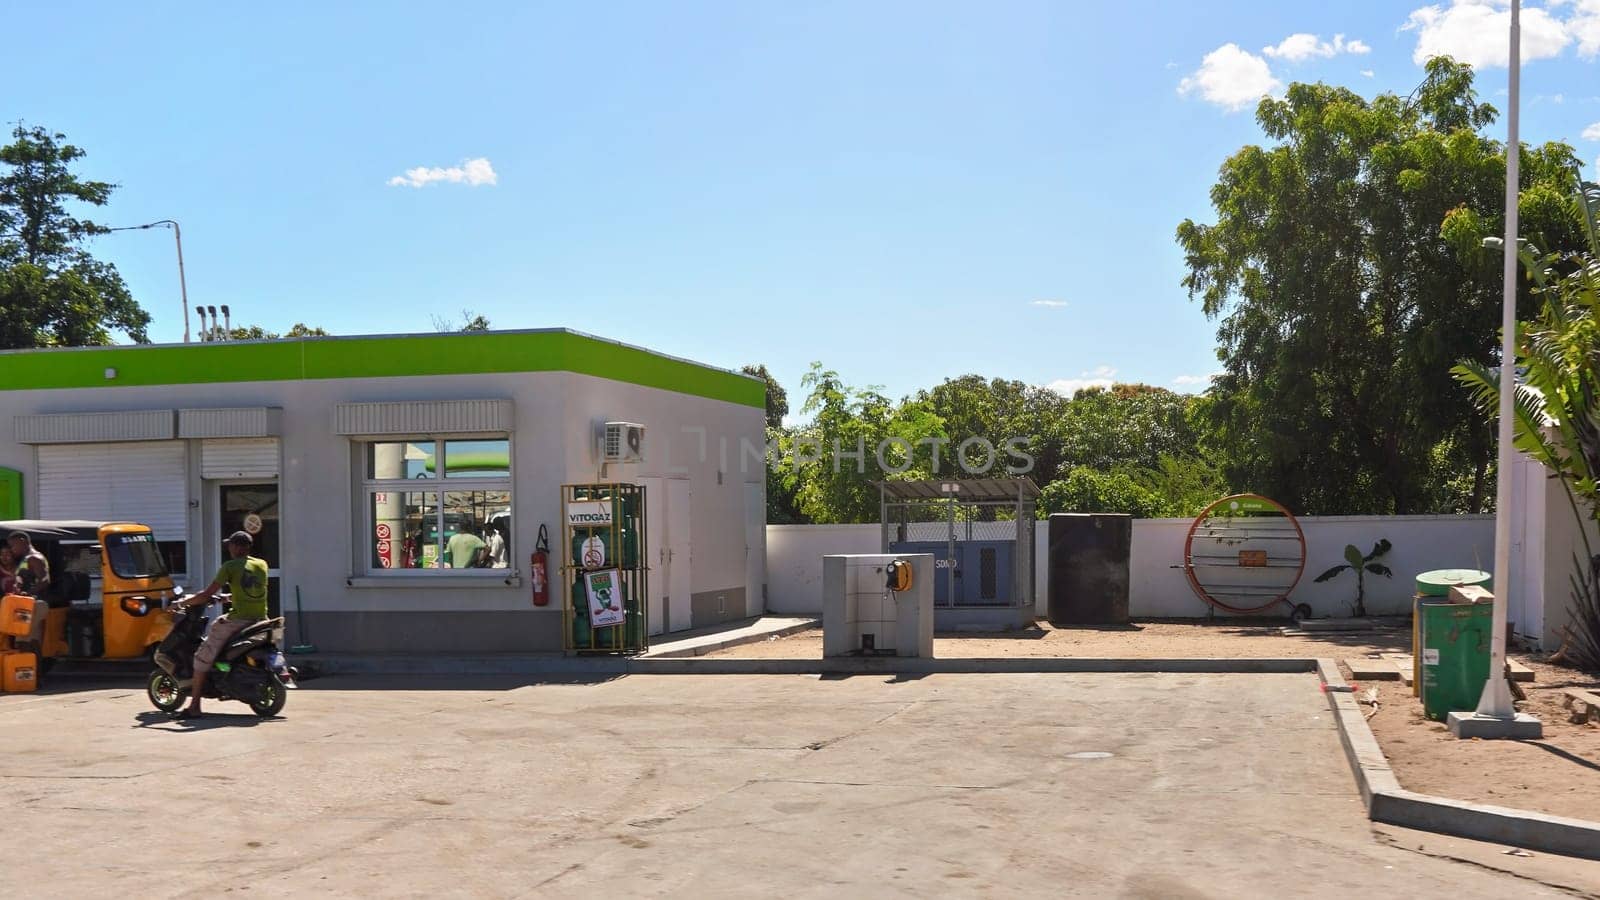 Sakaraha, Madagascar - May 05, 2019: Typical gas station (green Galana brand) at Madagascar on sunny day. Cars/fuel is expensive for locals, stations are used mostly for large trucks / small scooters by Ivanko